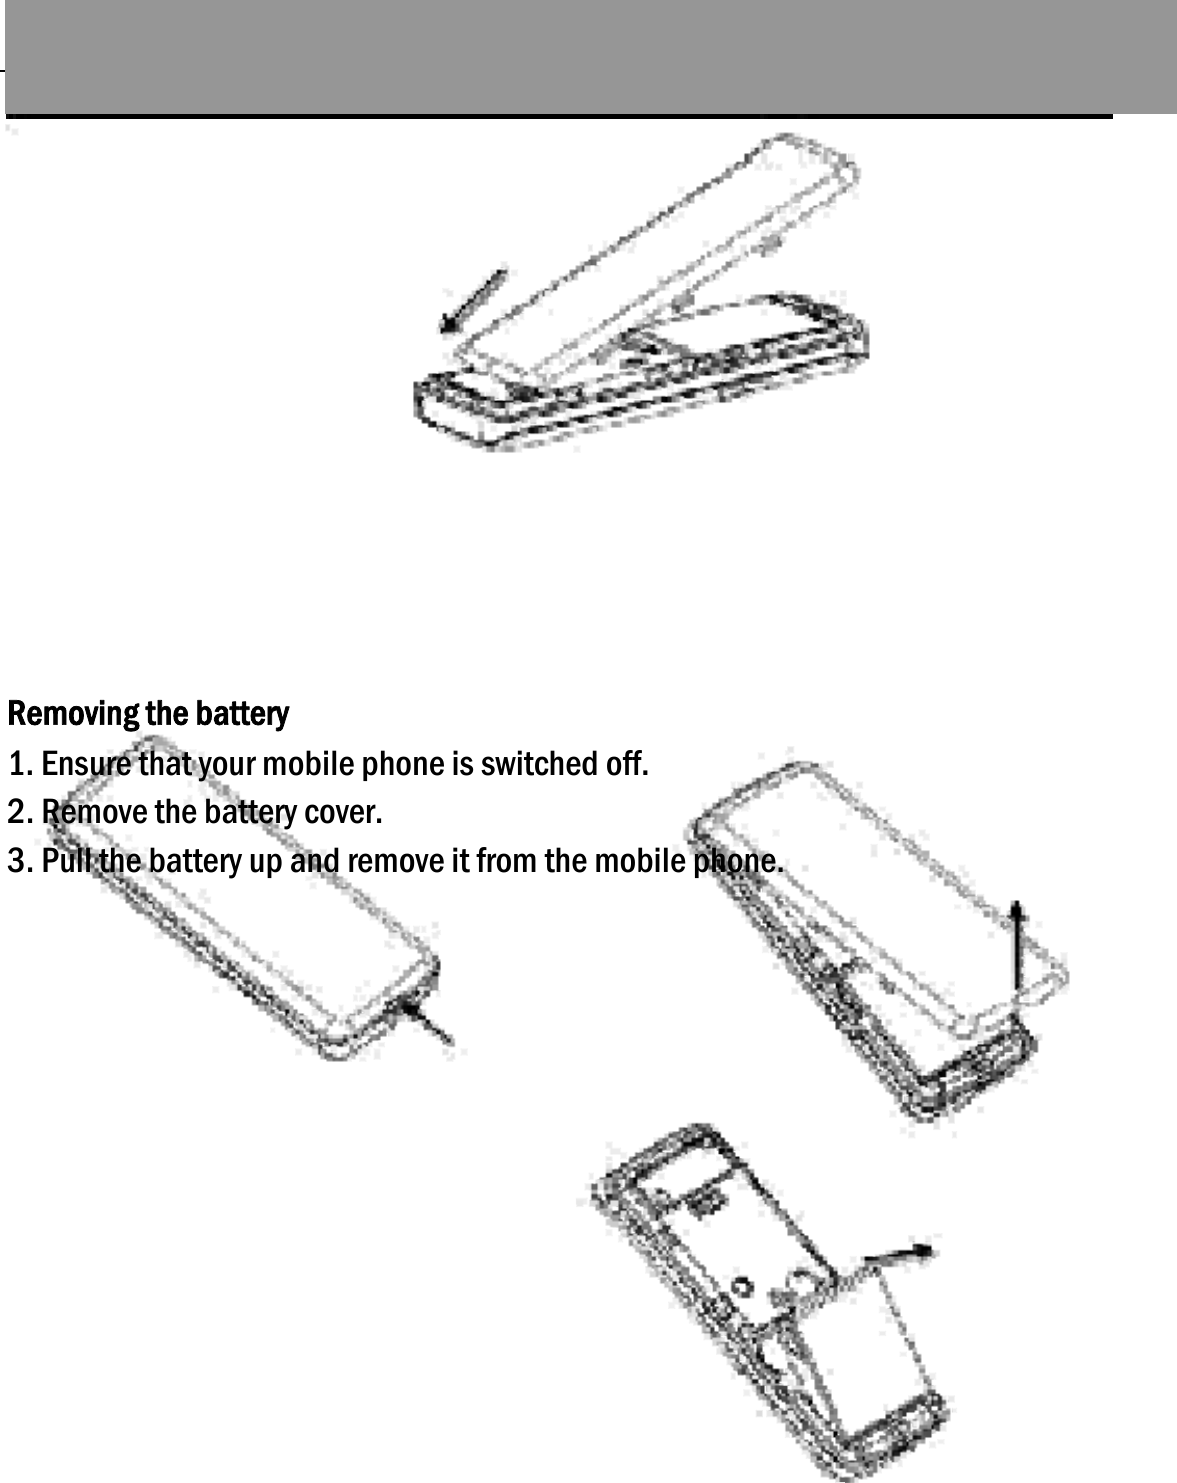  17               Removing the battery 1. Ensure that your mobile phone is switched off. 2. Remove the battery cover. 3. Pull the battery up and remove it from the mobile phone.                                                                                 